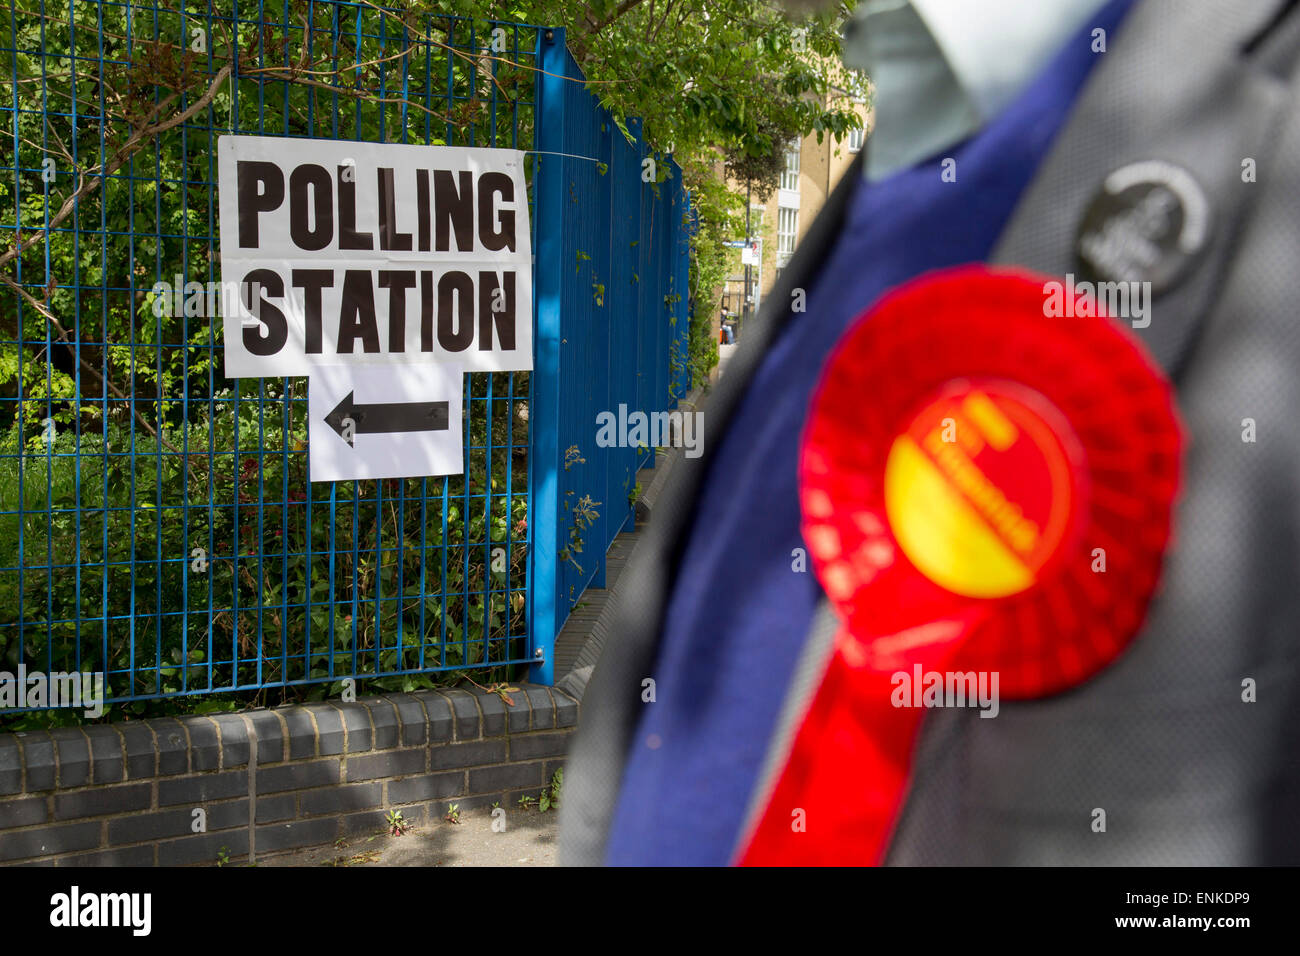 London, UK. Thursday 7th May 2015. Voters attending a polling station at Hermitage Primary School in the constituency of  Poplar and Limehouse in East London on the day of the general election. This is a Labour Party seat, although this electin is set to be one of the most hotly contested in a generation. Stock Photo